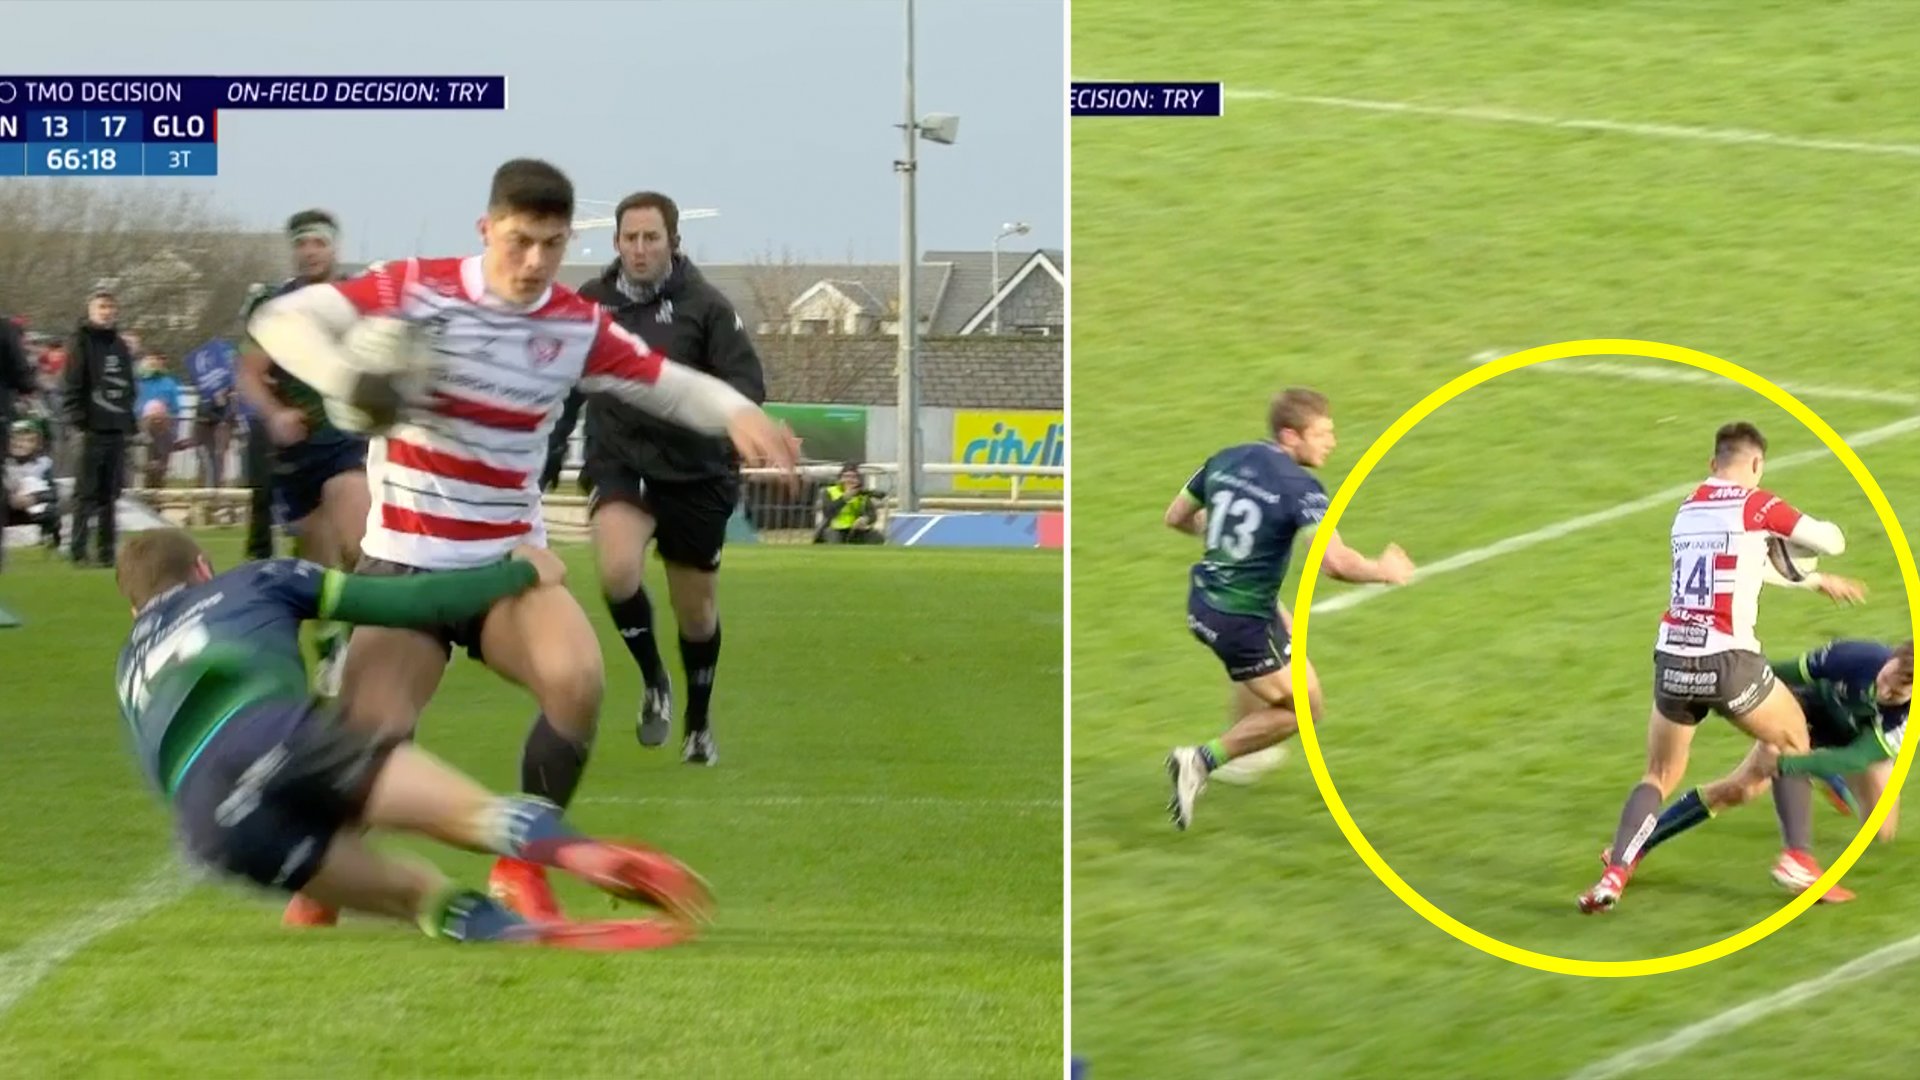 18-year-old Welsh sensation has just pulled the filthiest pass you'll see this month